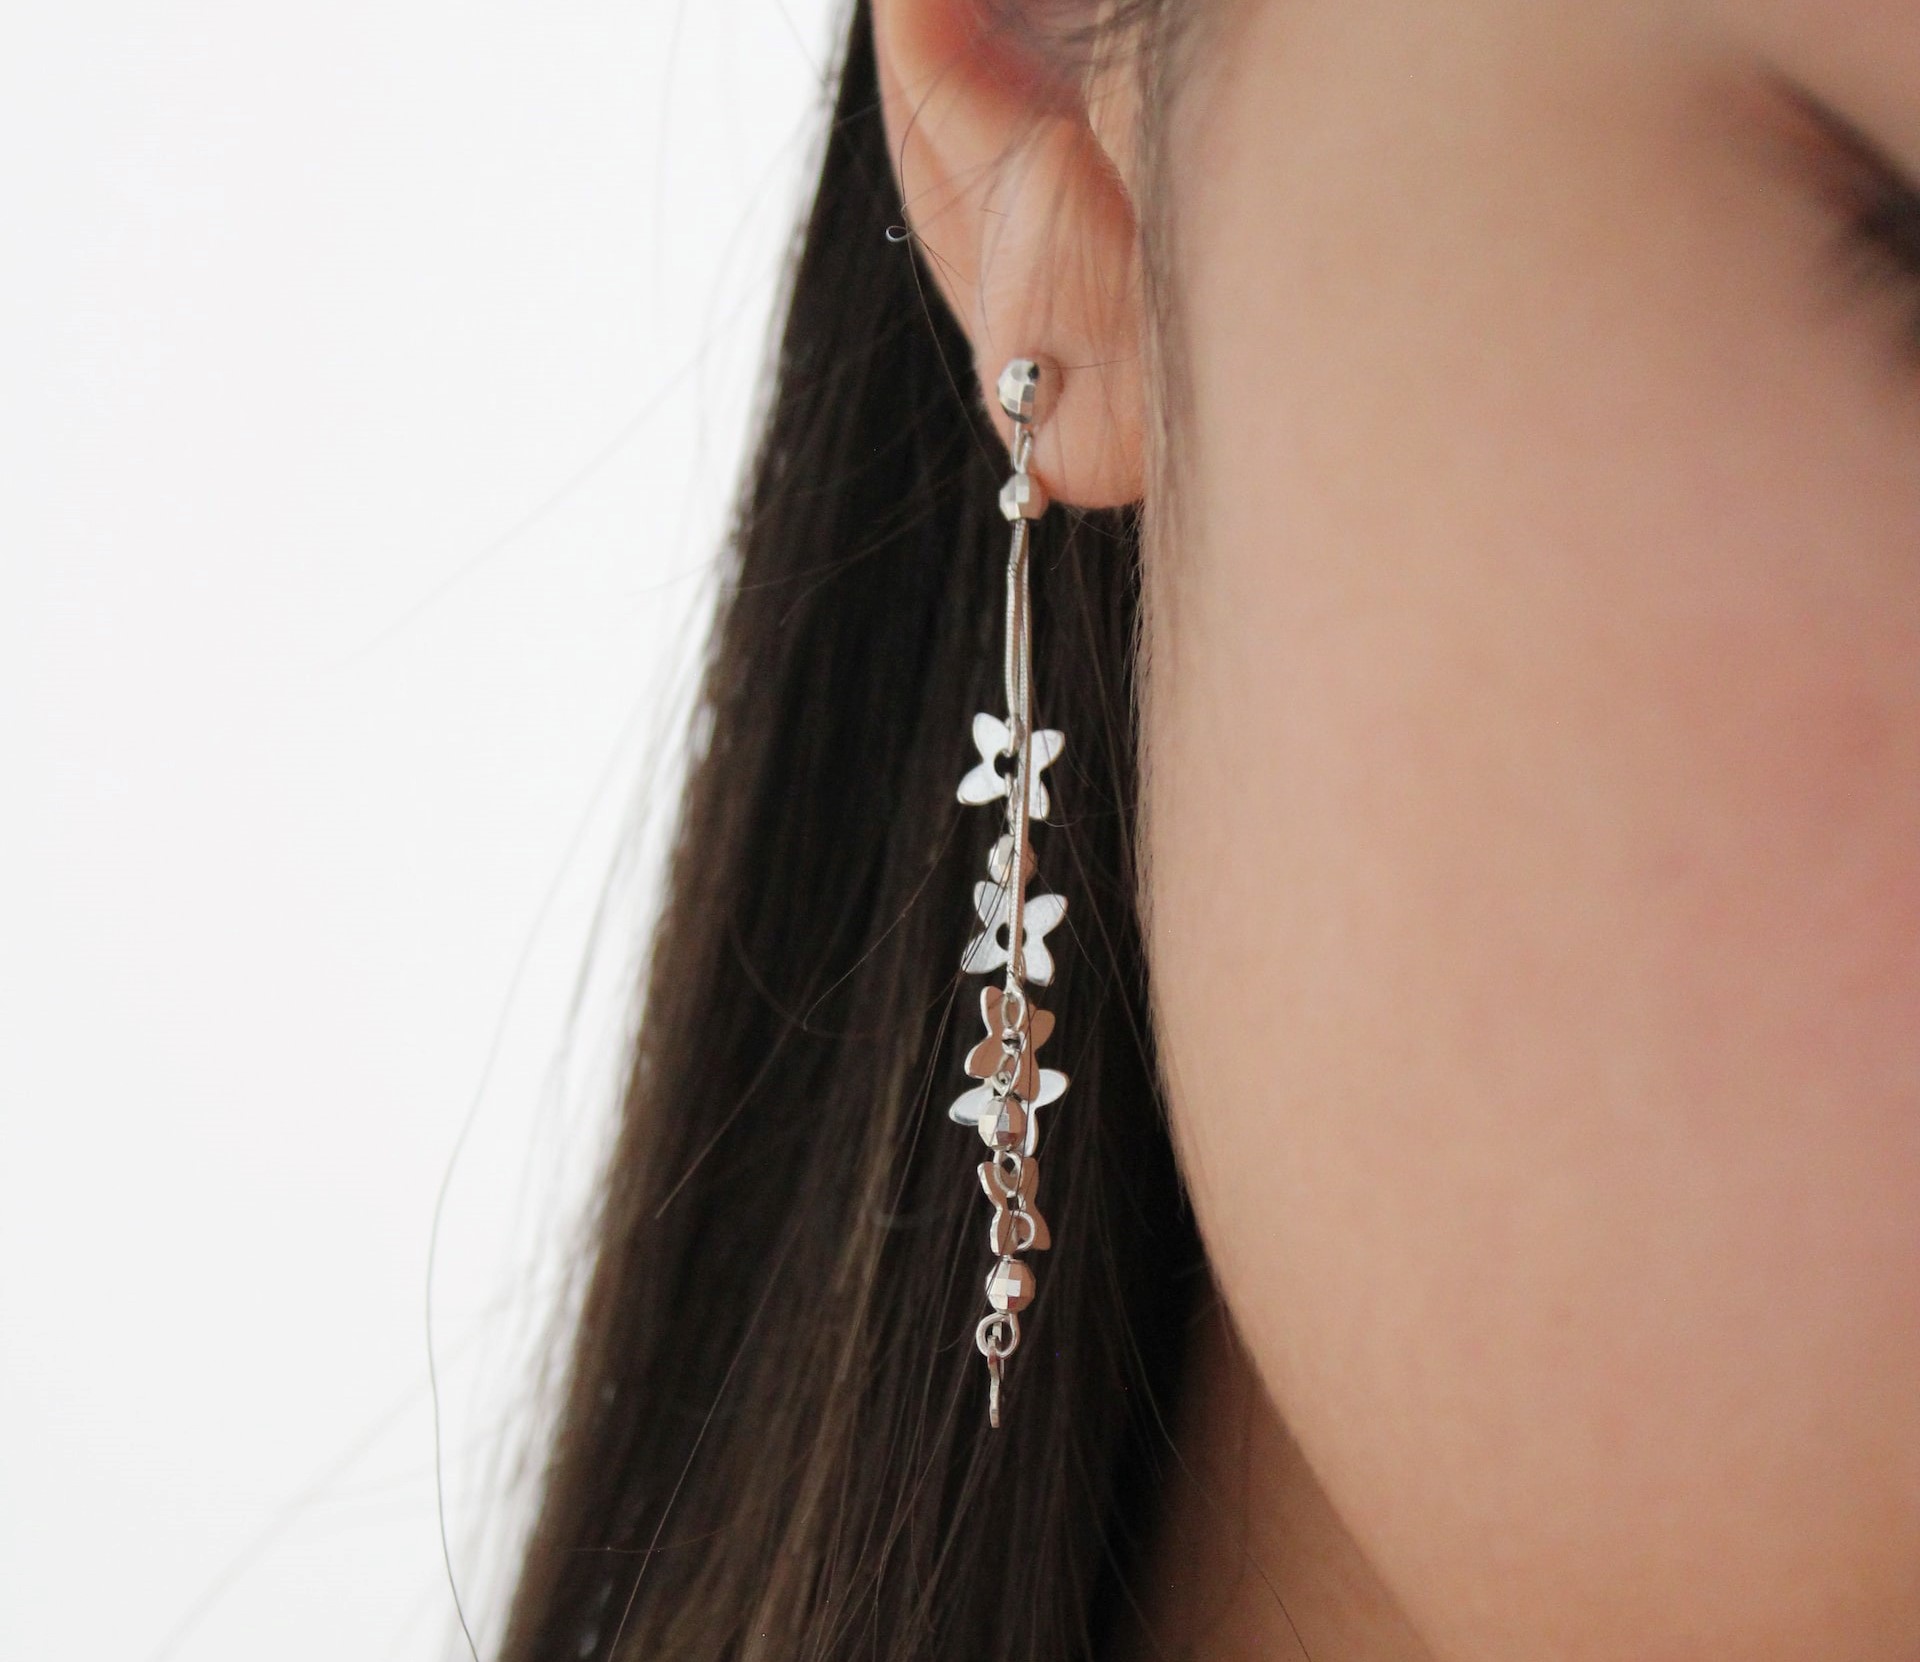 The One Thing You’re Missing to Take Your Outfit from Bland to Bombshell? Sterling Silver Earrings!